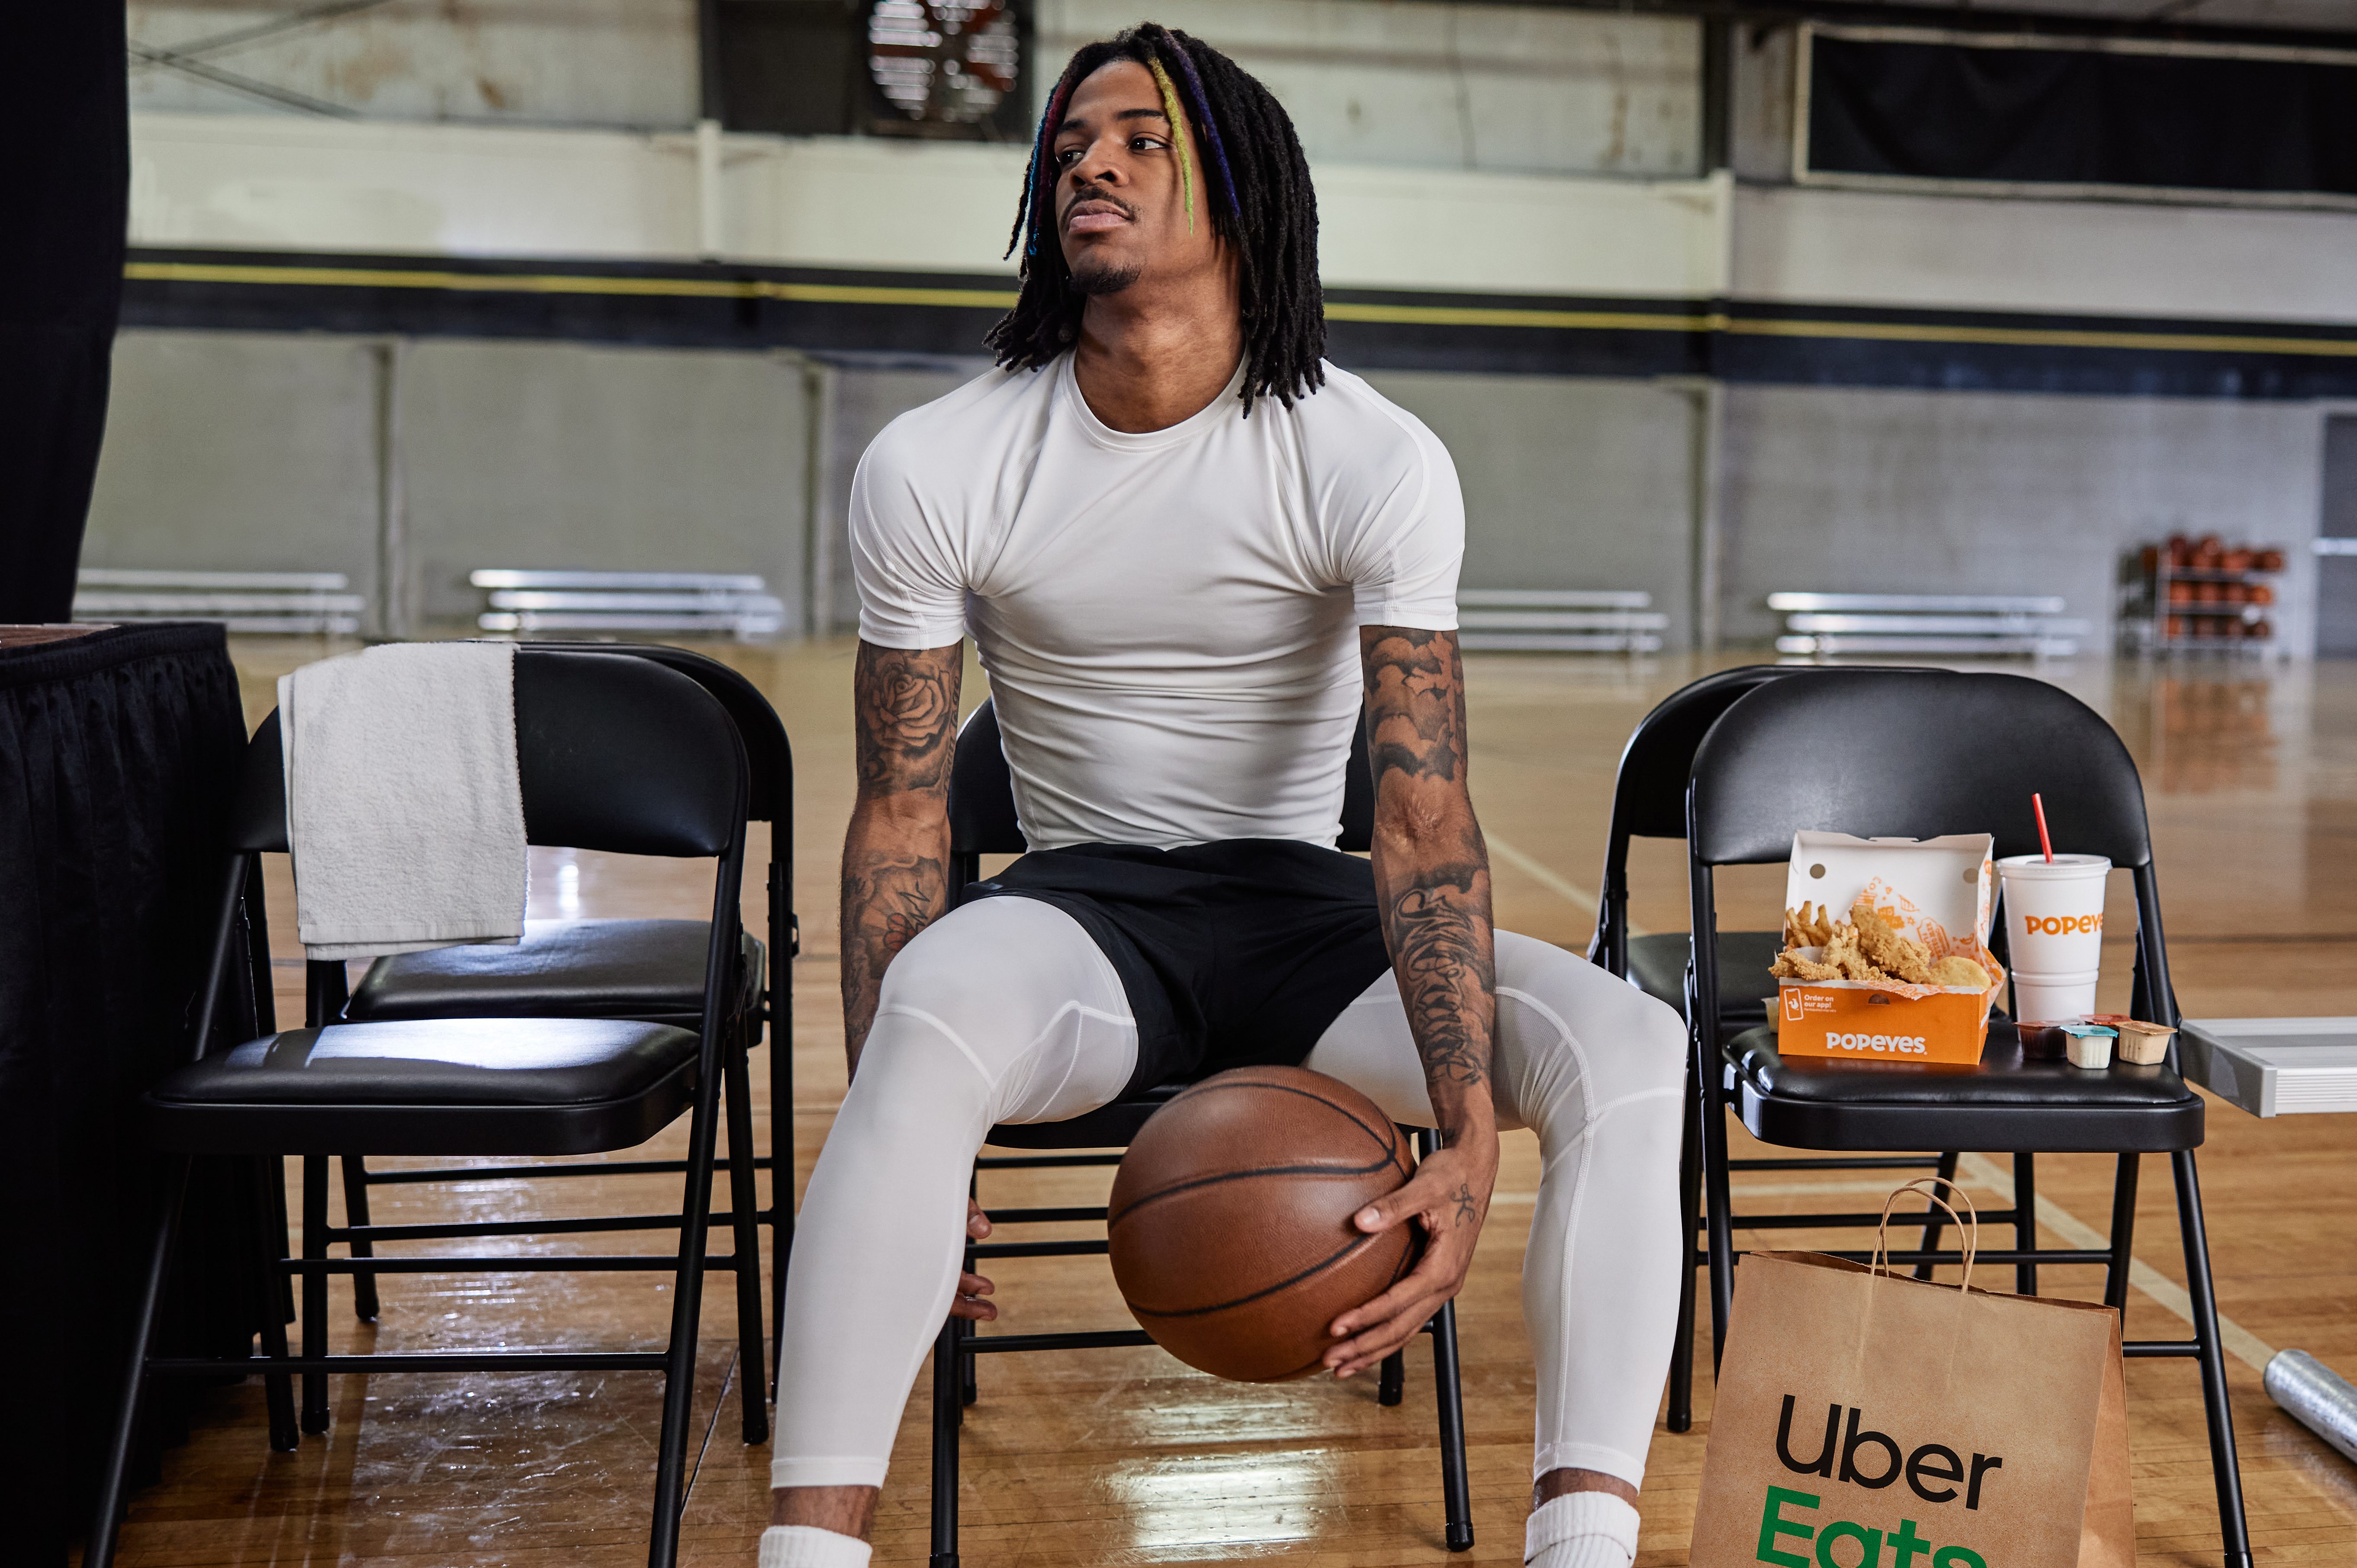 An expert on dunking, Ja Morant was a natural to promote the Most Dunkable Meal.